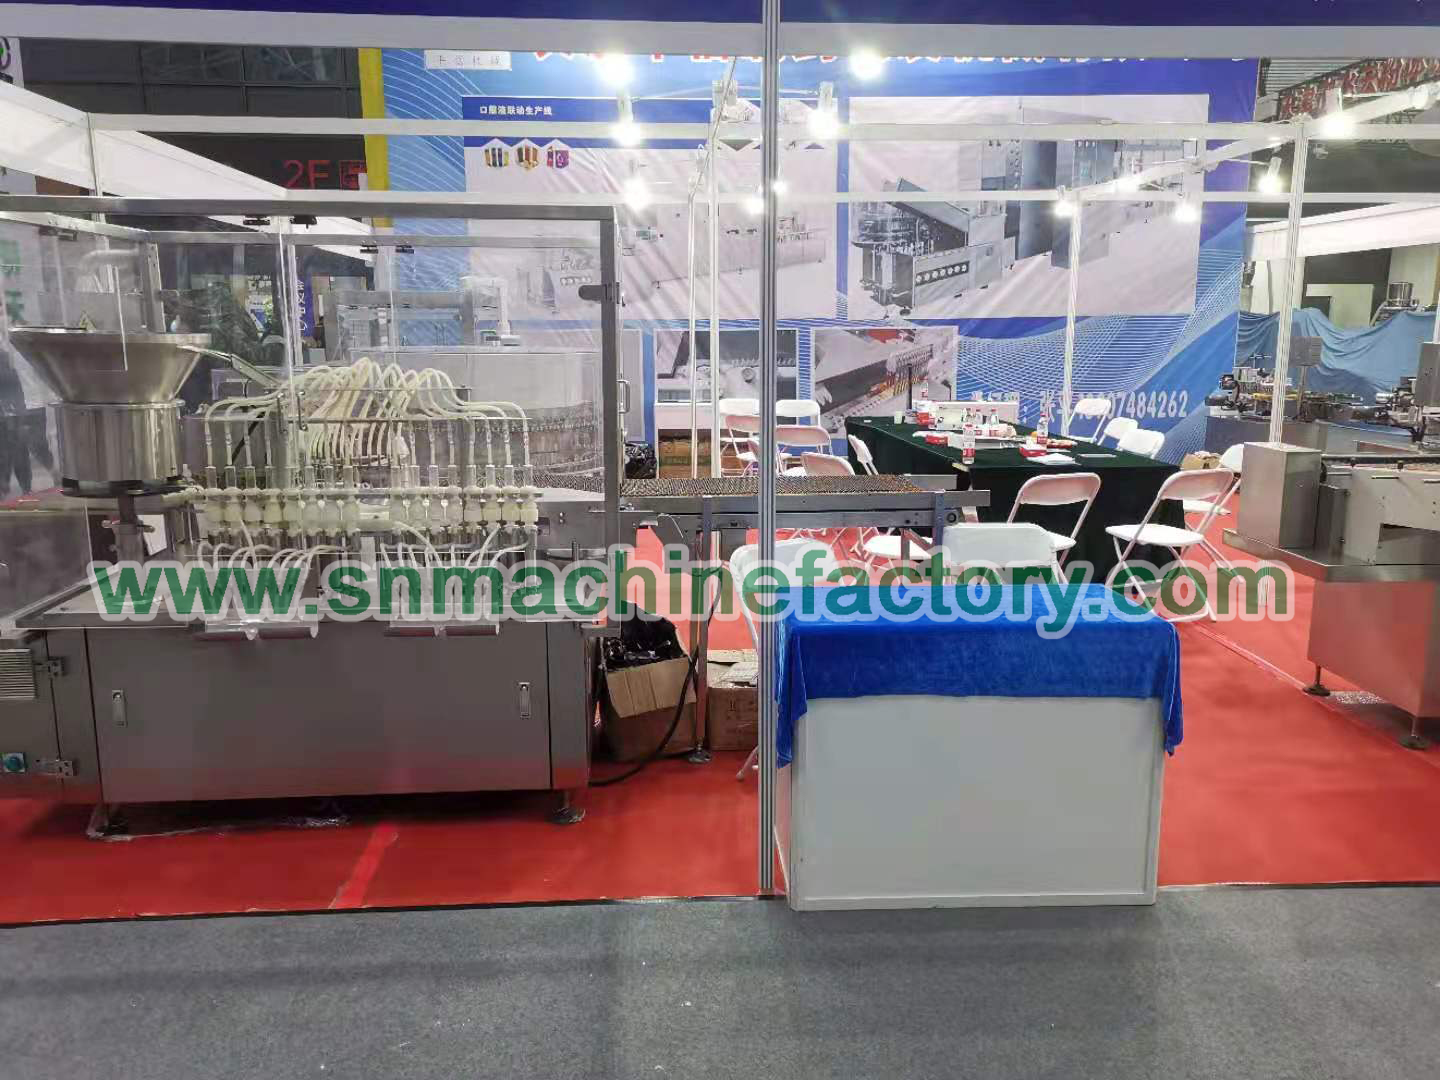 60th Qingdao pharmaceutical machinery expo. conclusion